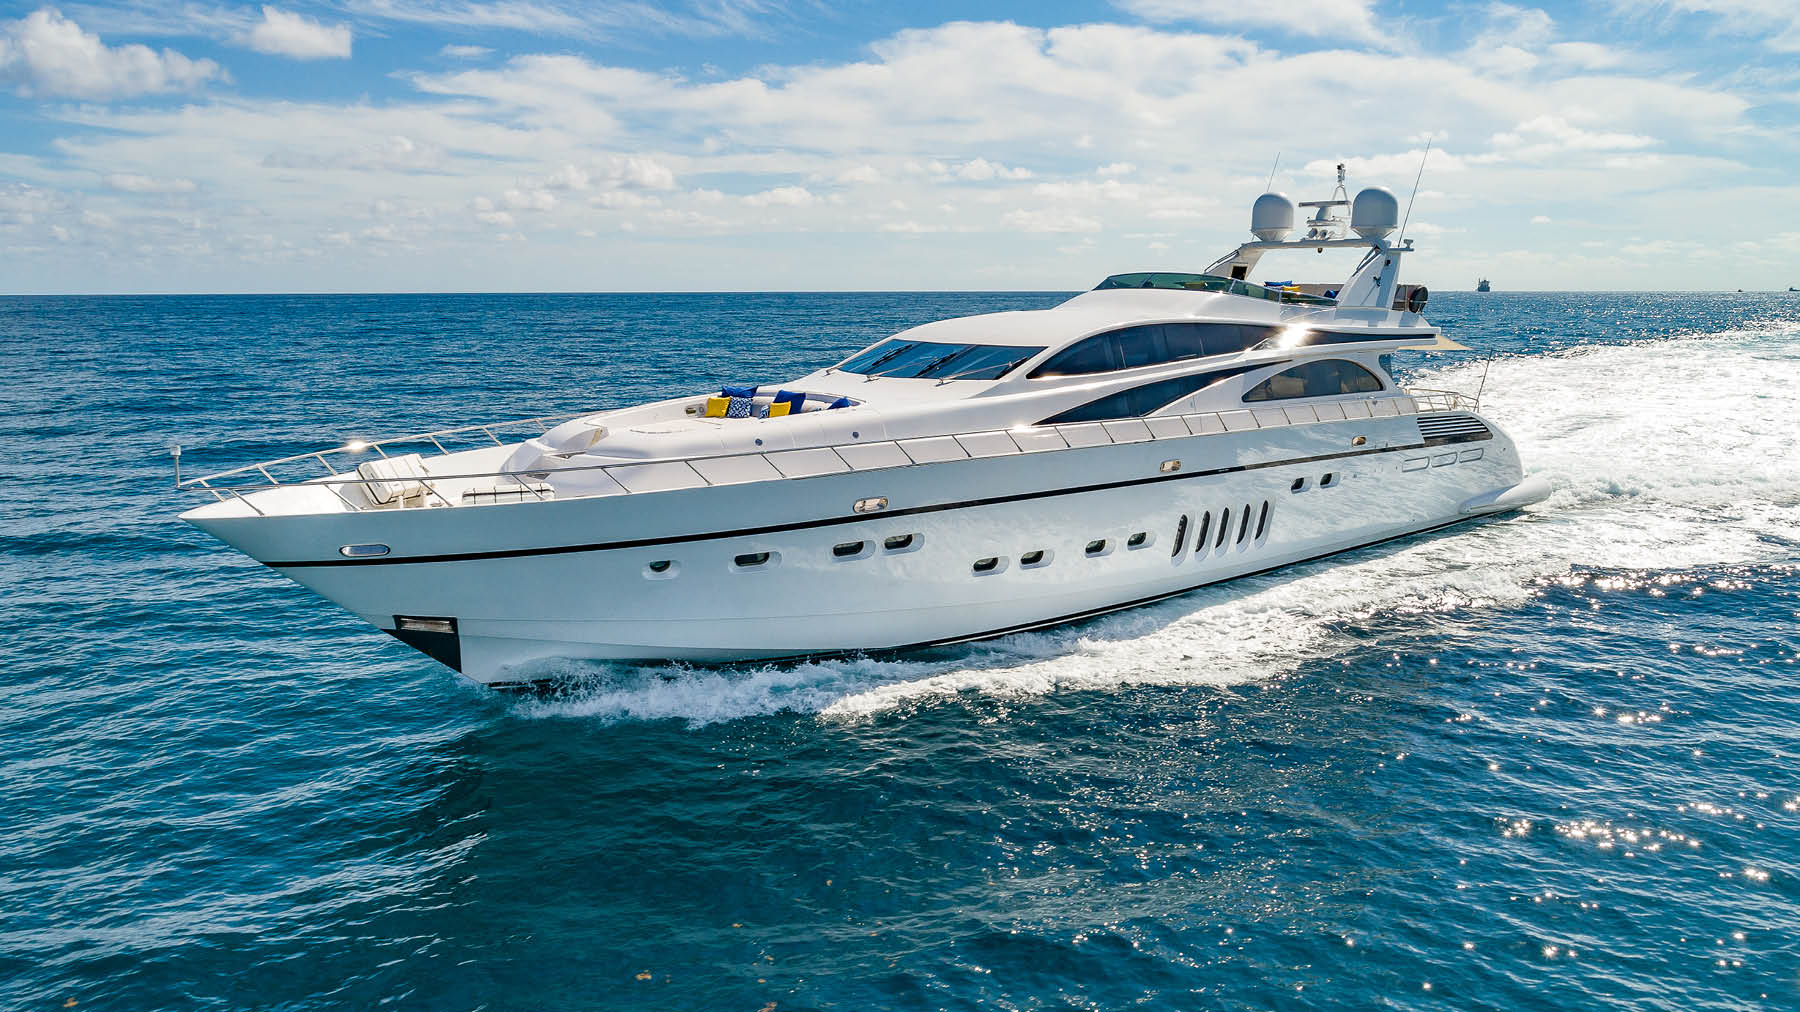 dream yacht charters boats for sale